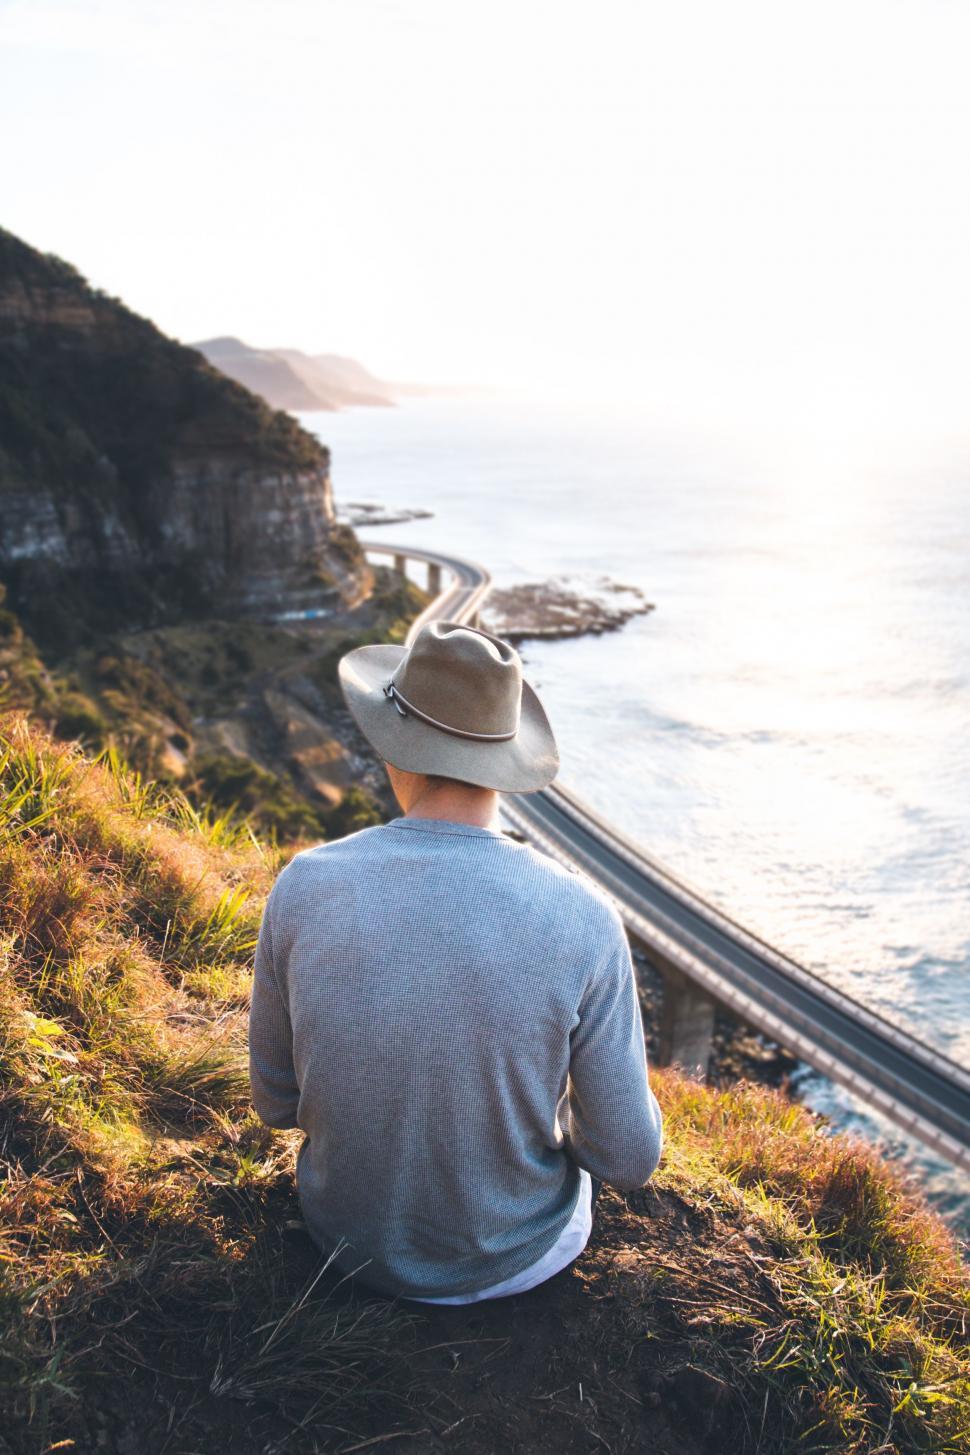 Free Image of Man Sitting on Hill Overlooking Ocean 